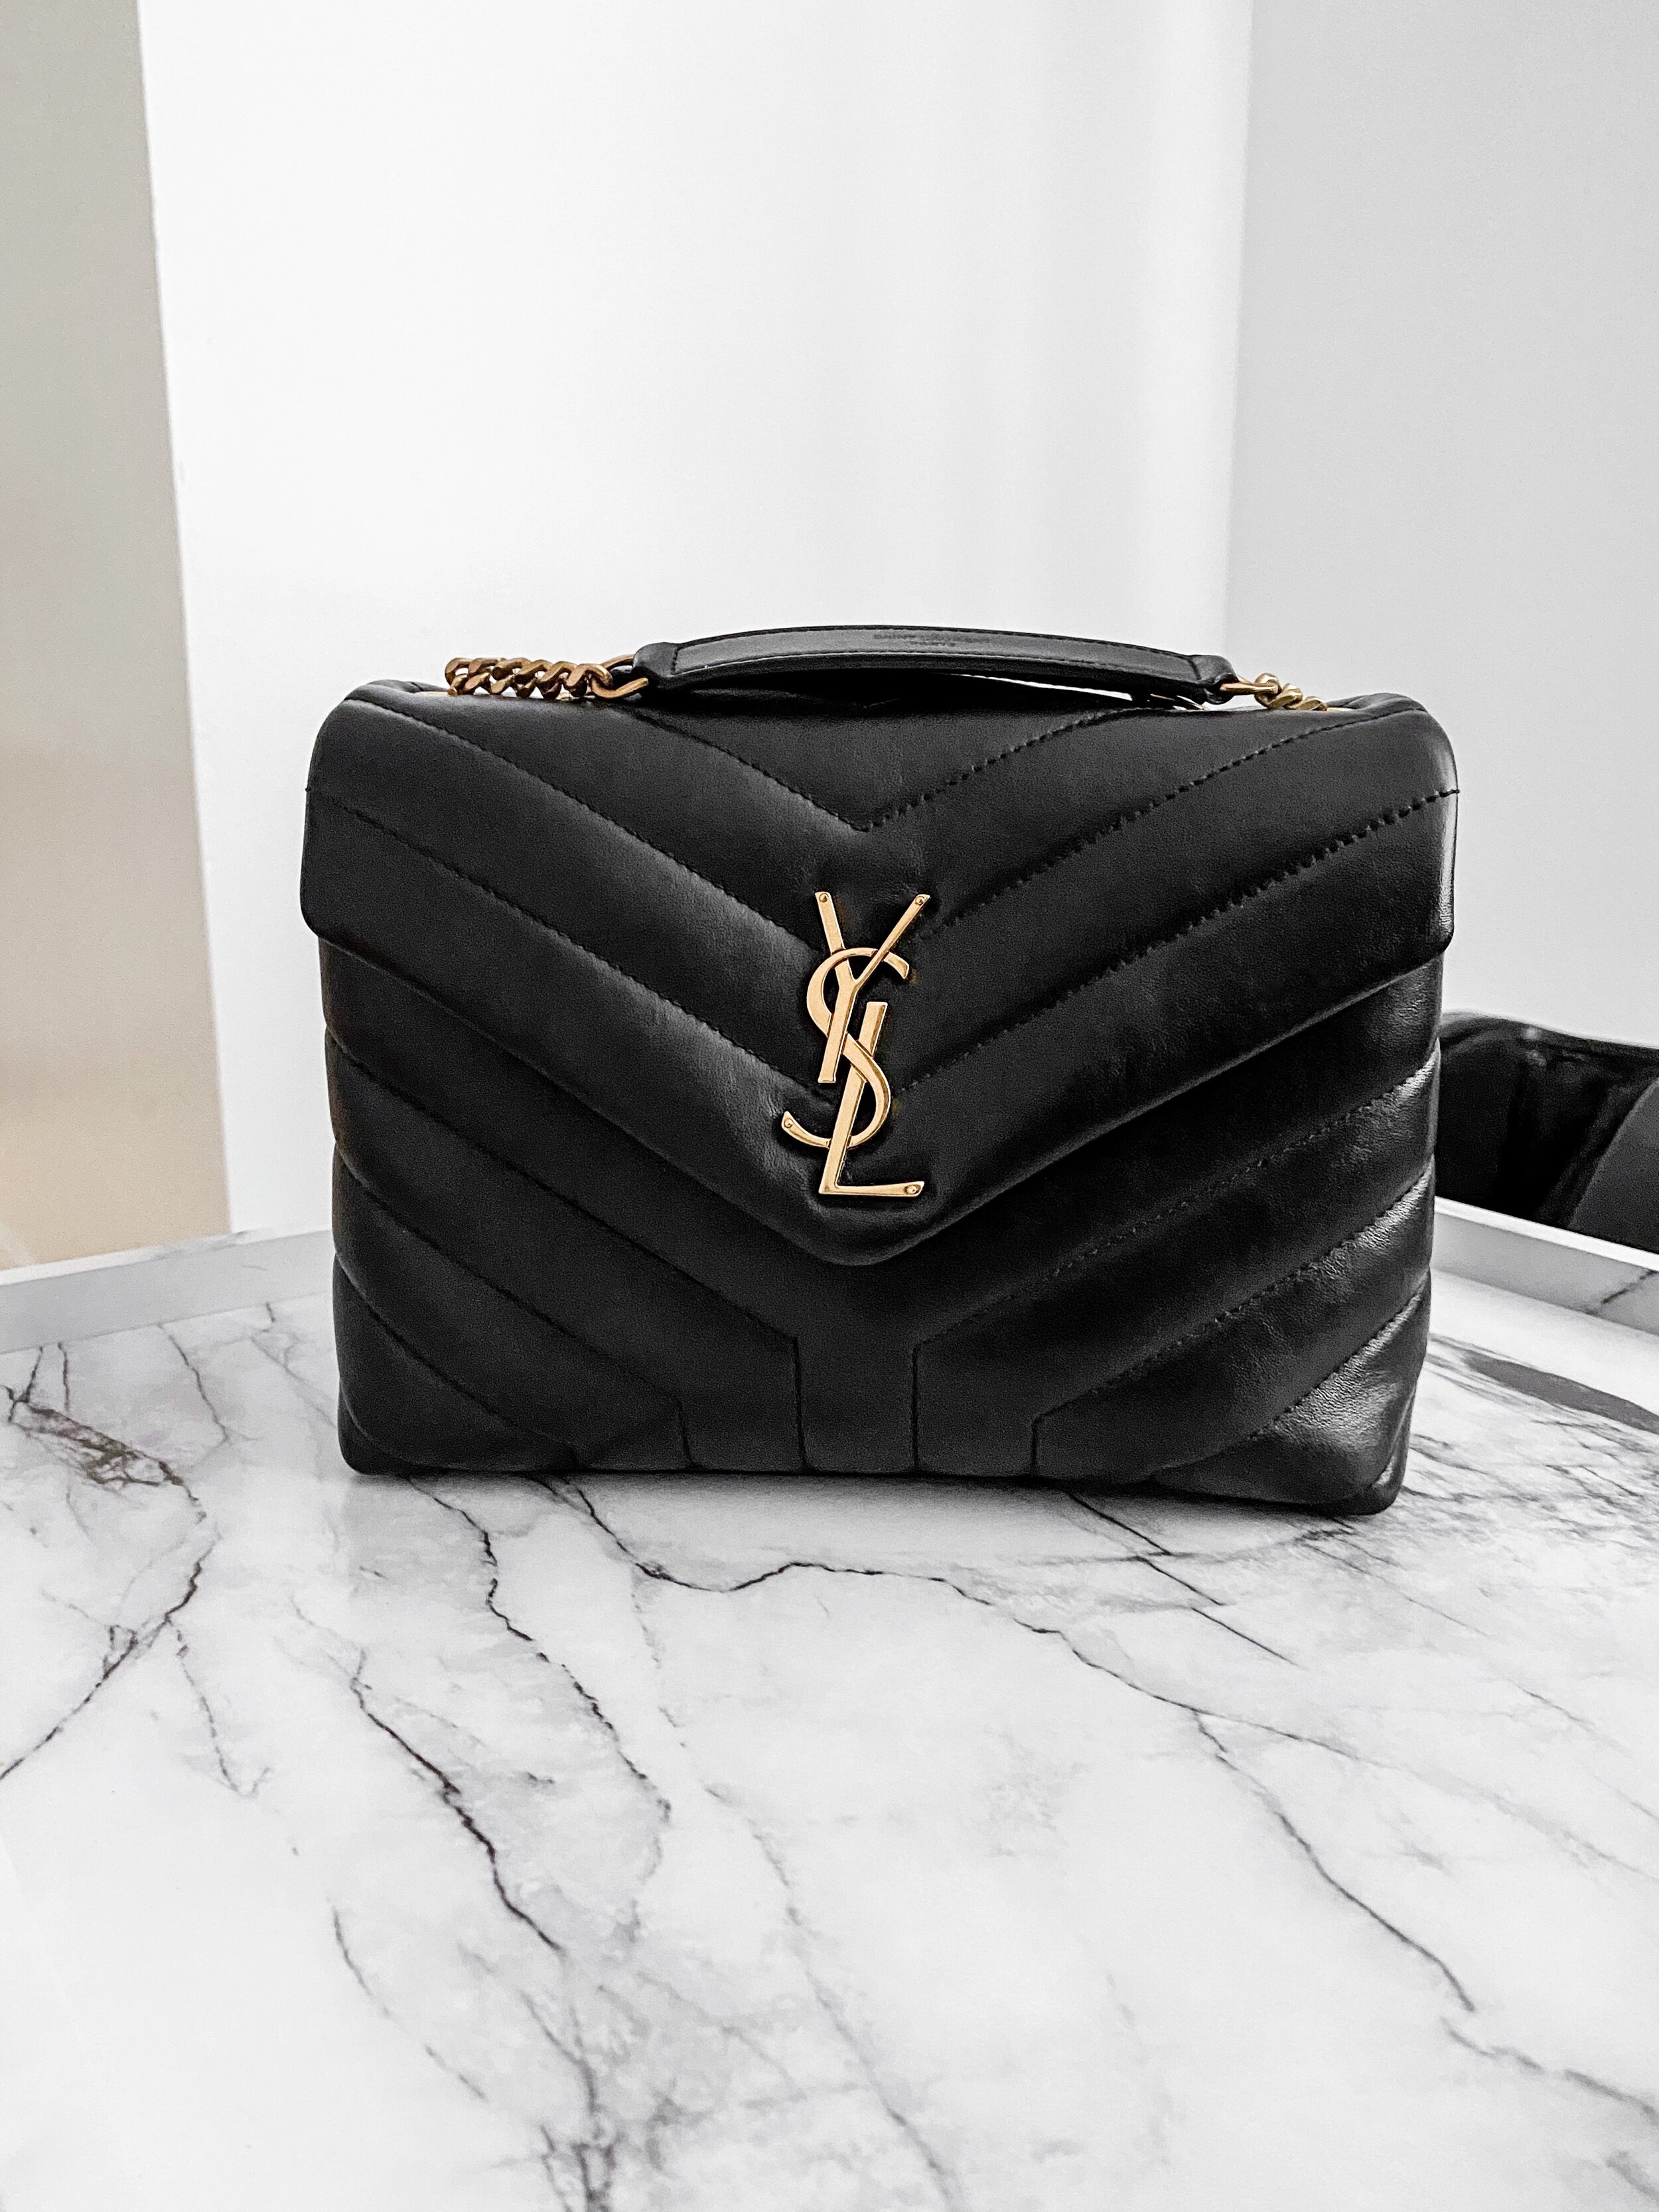 The Multiple Ways To Style YSL TOY LOU LOU Bag